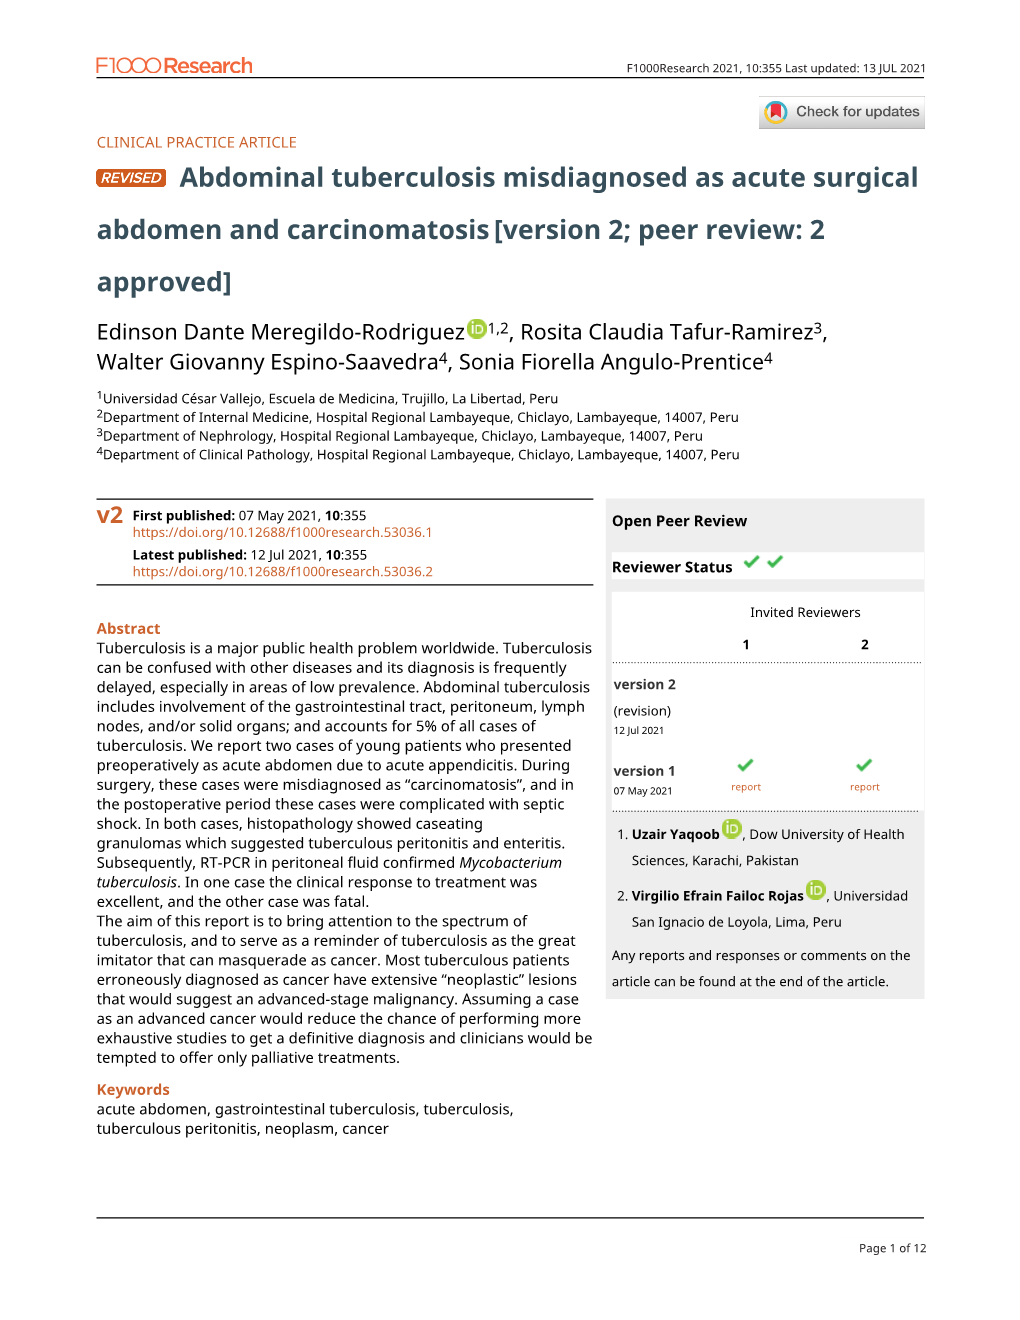 Abdominal Tuberculosis Misdiagnosed As Acute Surgical Abdomen and Carcinomatosis [Version 2; Peer Review: 2 Approved]